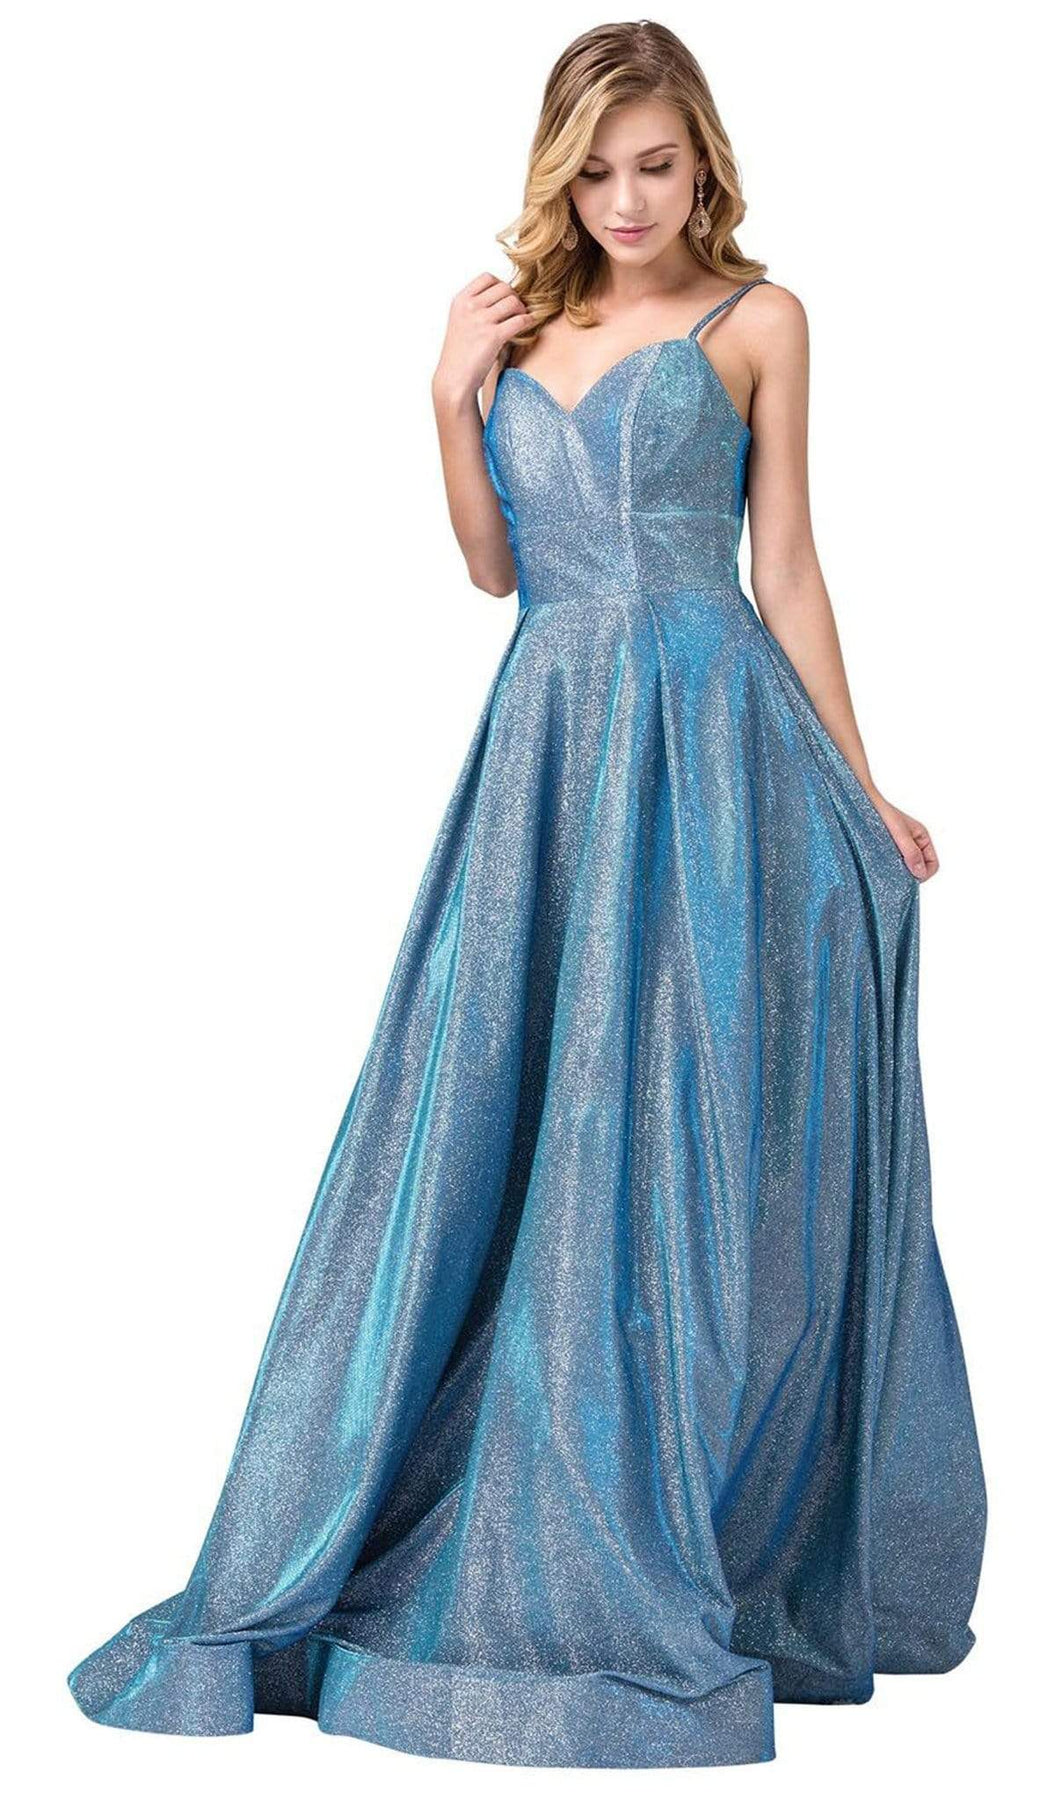 Dancing Queen - 2611 Sweetheart Lace Up Back Metallic Jersey Gown Special Occasion Dress XS / Blue